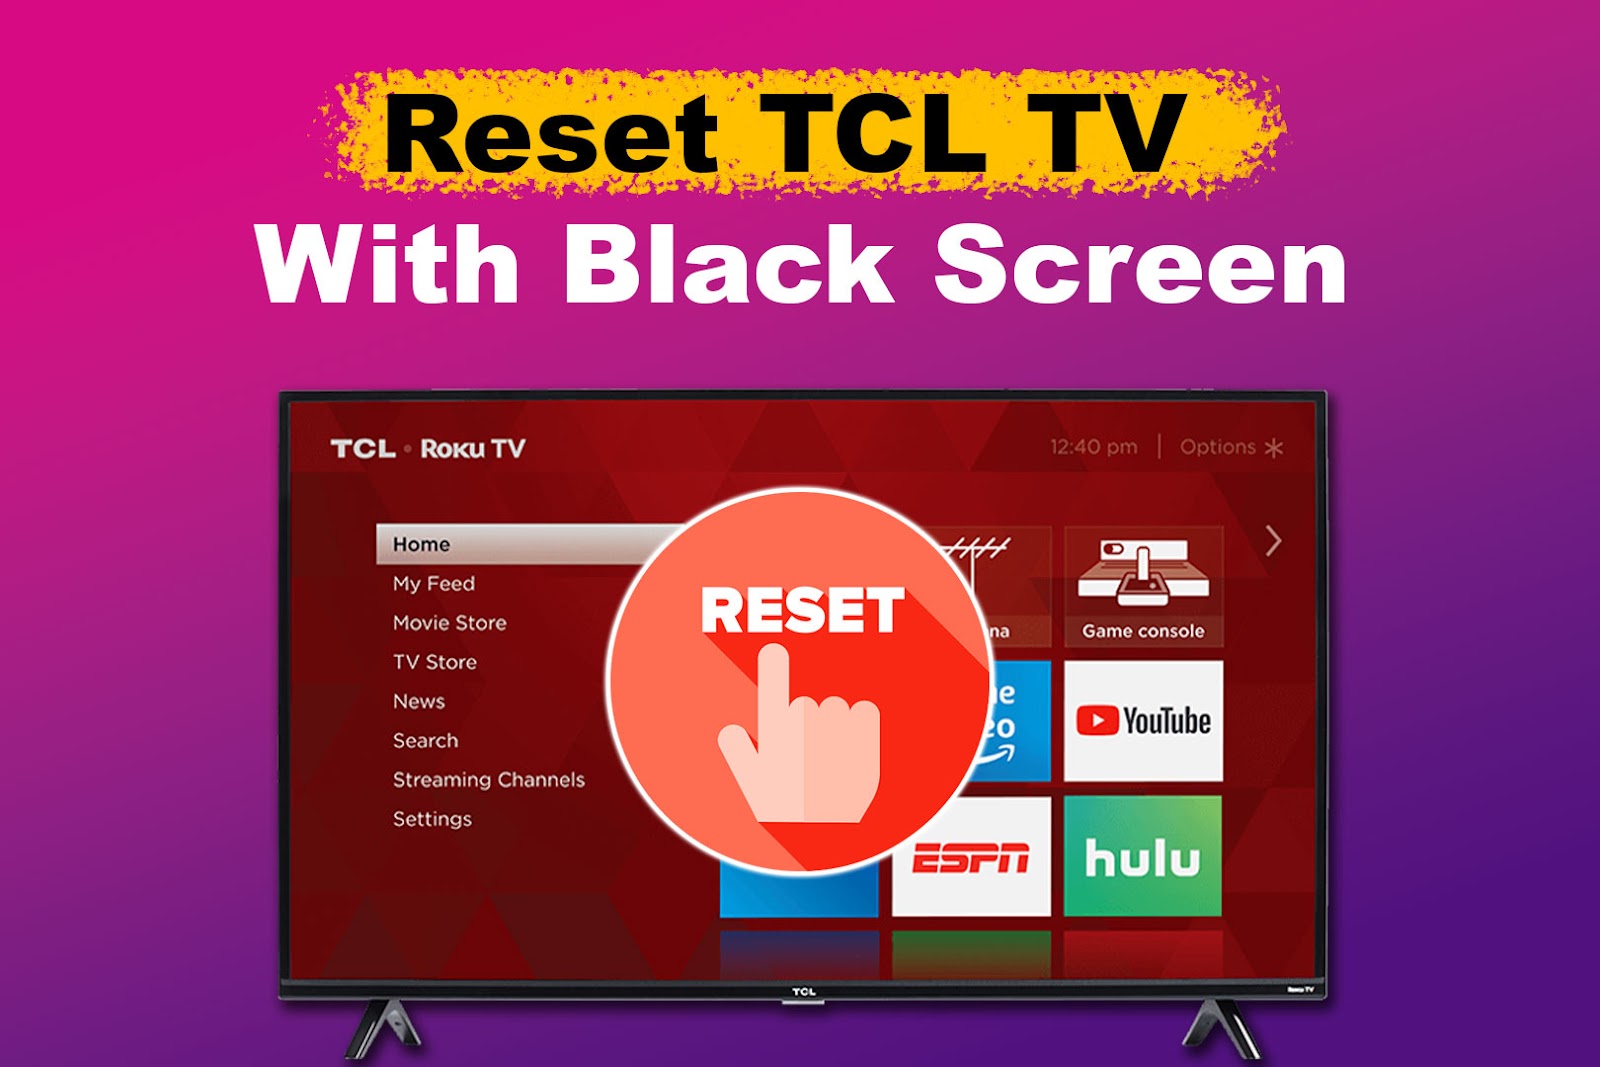 How To Reset TCL TV With Black Screen